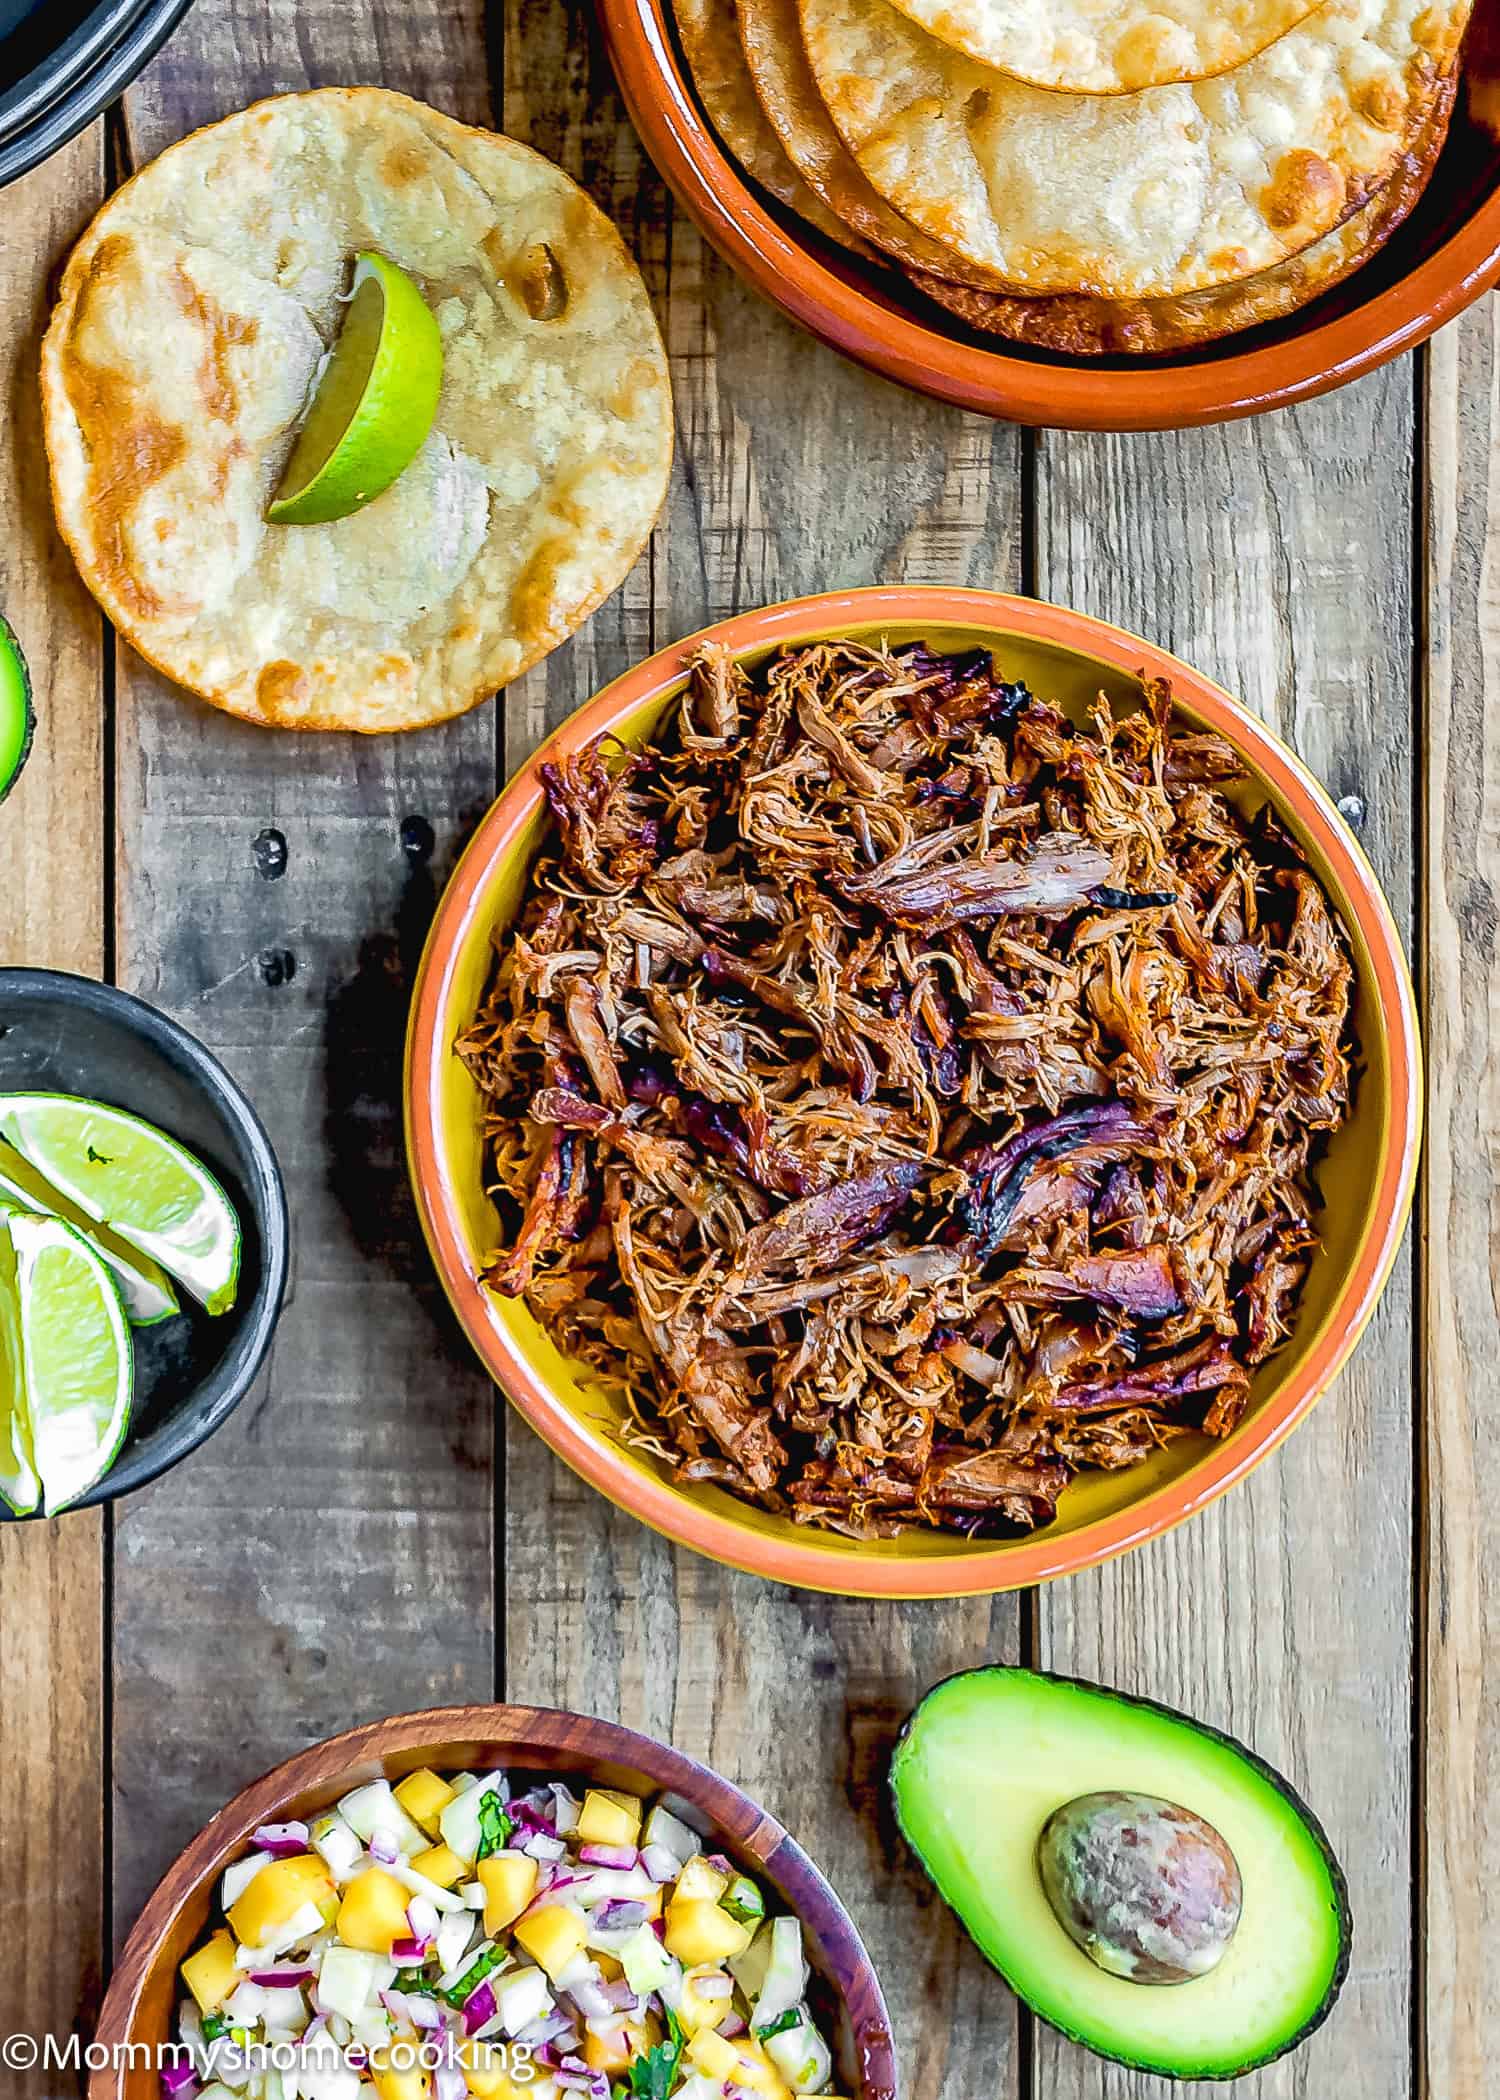 Slow-Cooker Spicy Pork Carnitas in a bowl and tostadas, avocado and lime wedges on the sides over a wooden surface.